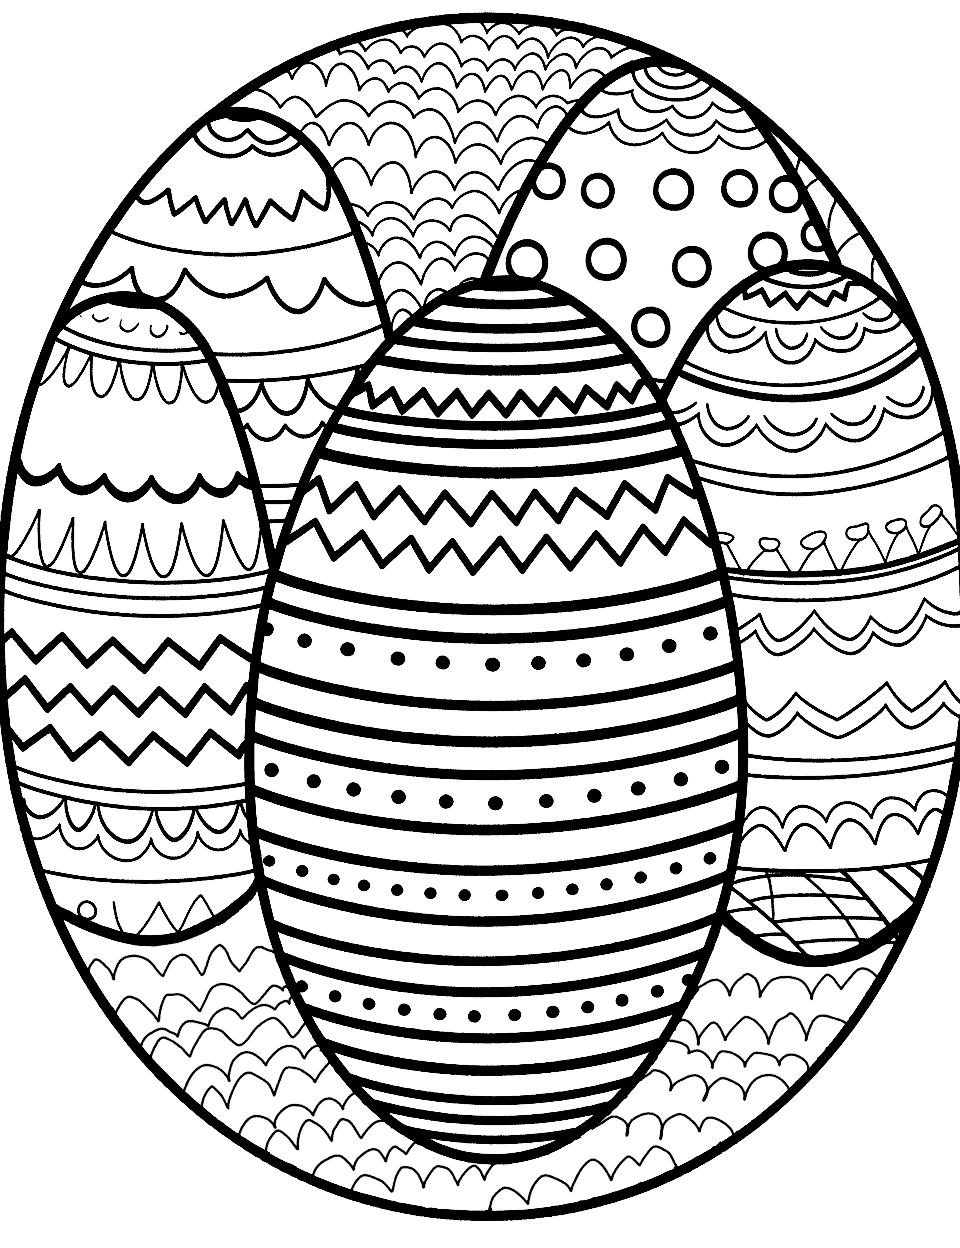 Easter Egg Medley Coloring Page - An assortment of different-sized Easter eggs, each showcasing unique designs like stripes, polka dots, and zigzag patterns, encouraging creativity in coloring.